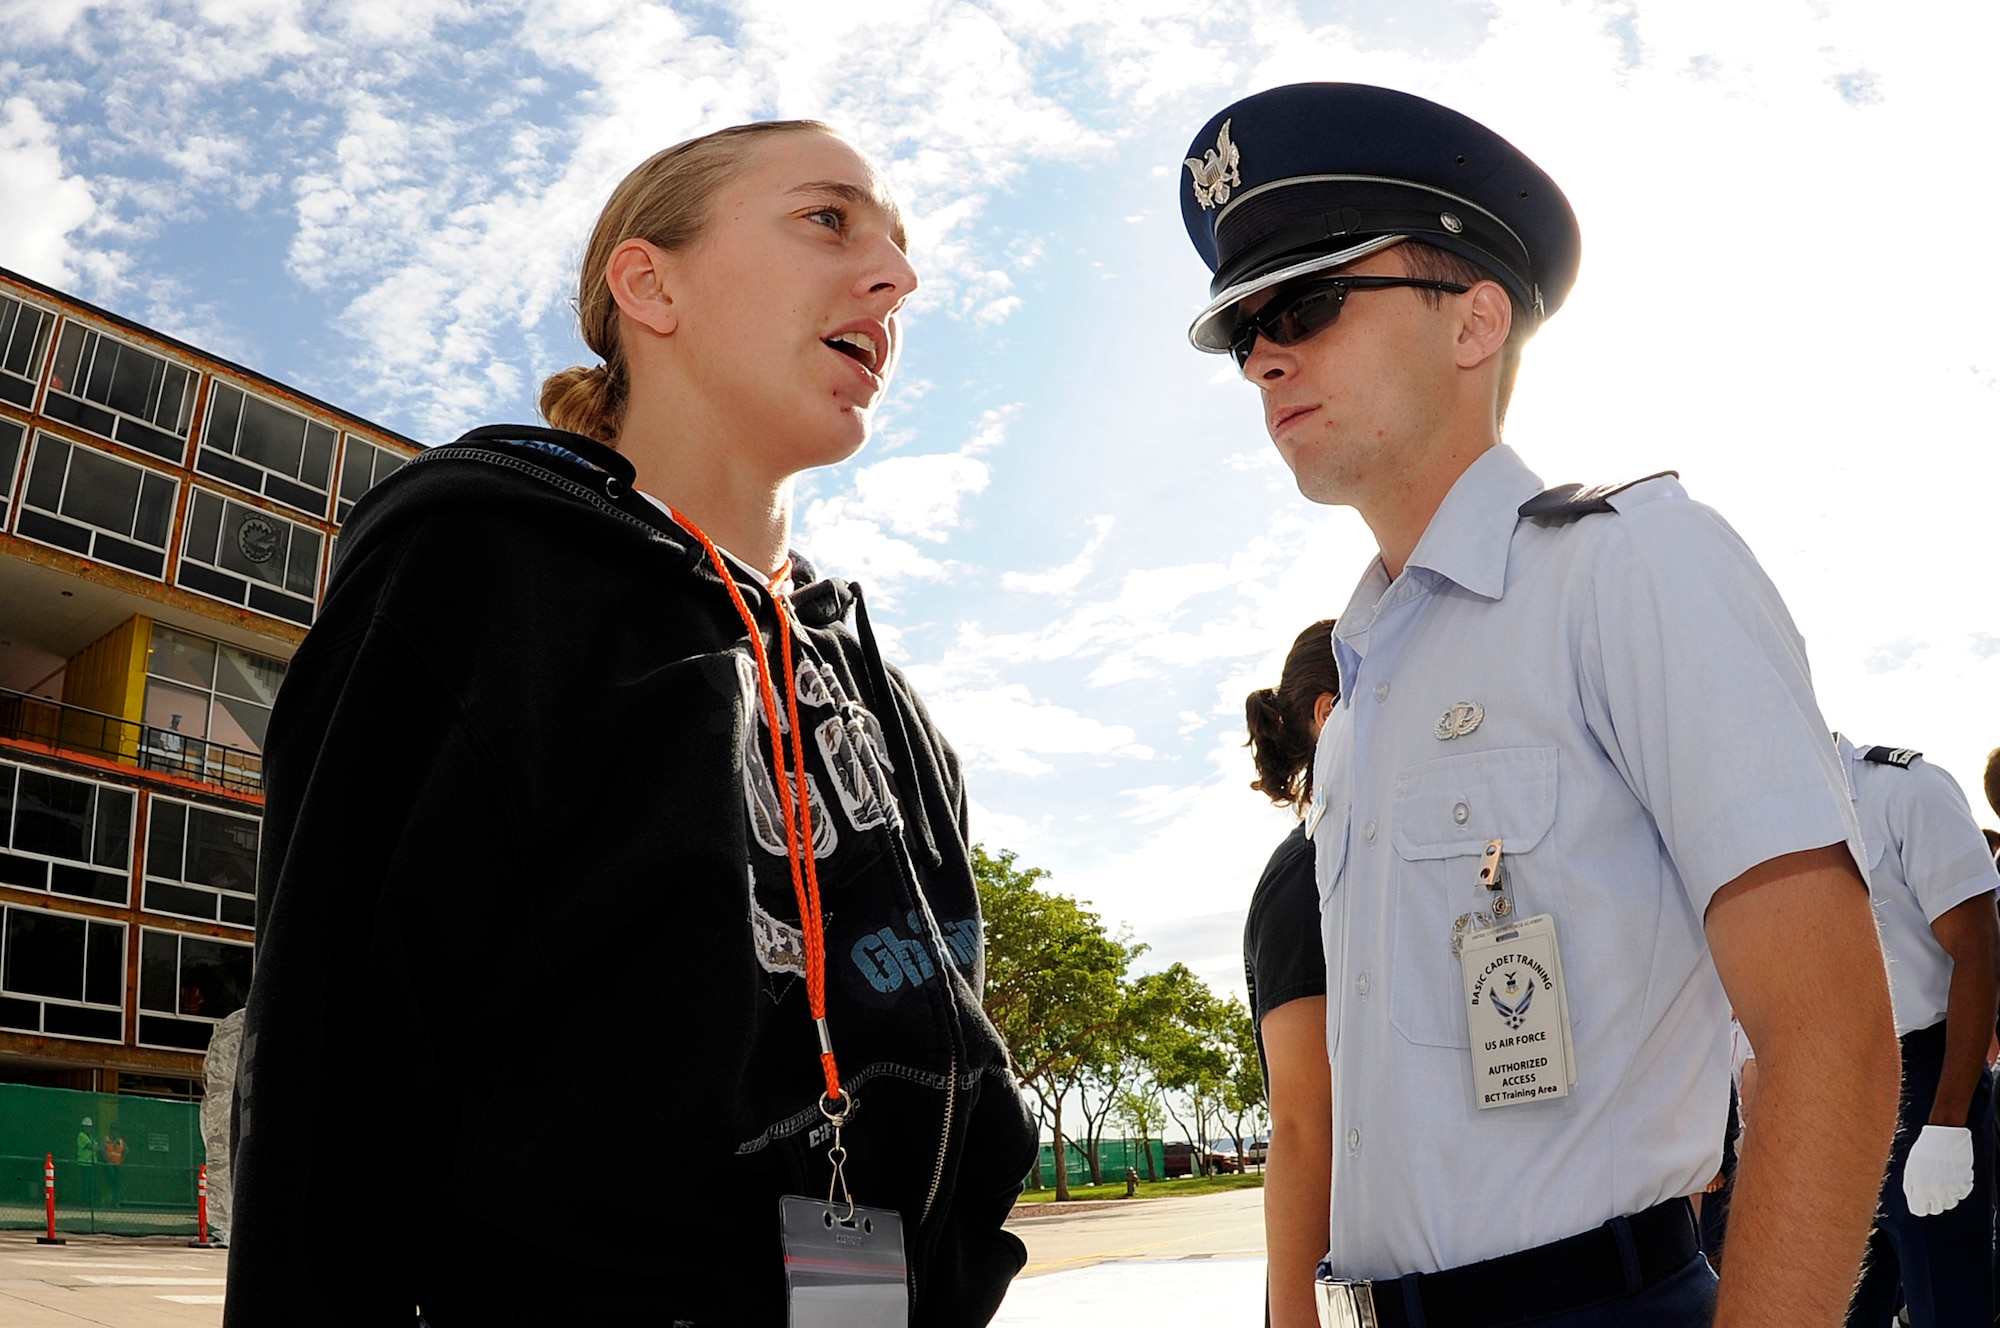 A basic cadet learns basic responses during cadet inprocessing June 25 at the U.S. Air Force Academy in Colorado Springs, Colo. Females comprise 20 percent of the Class of 2013. (U.S. Air Force photo/Mike Kaplan) 